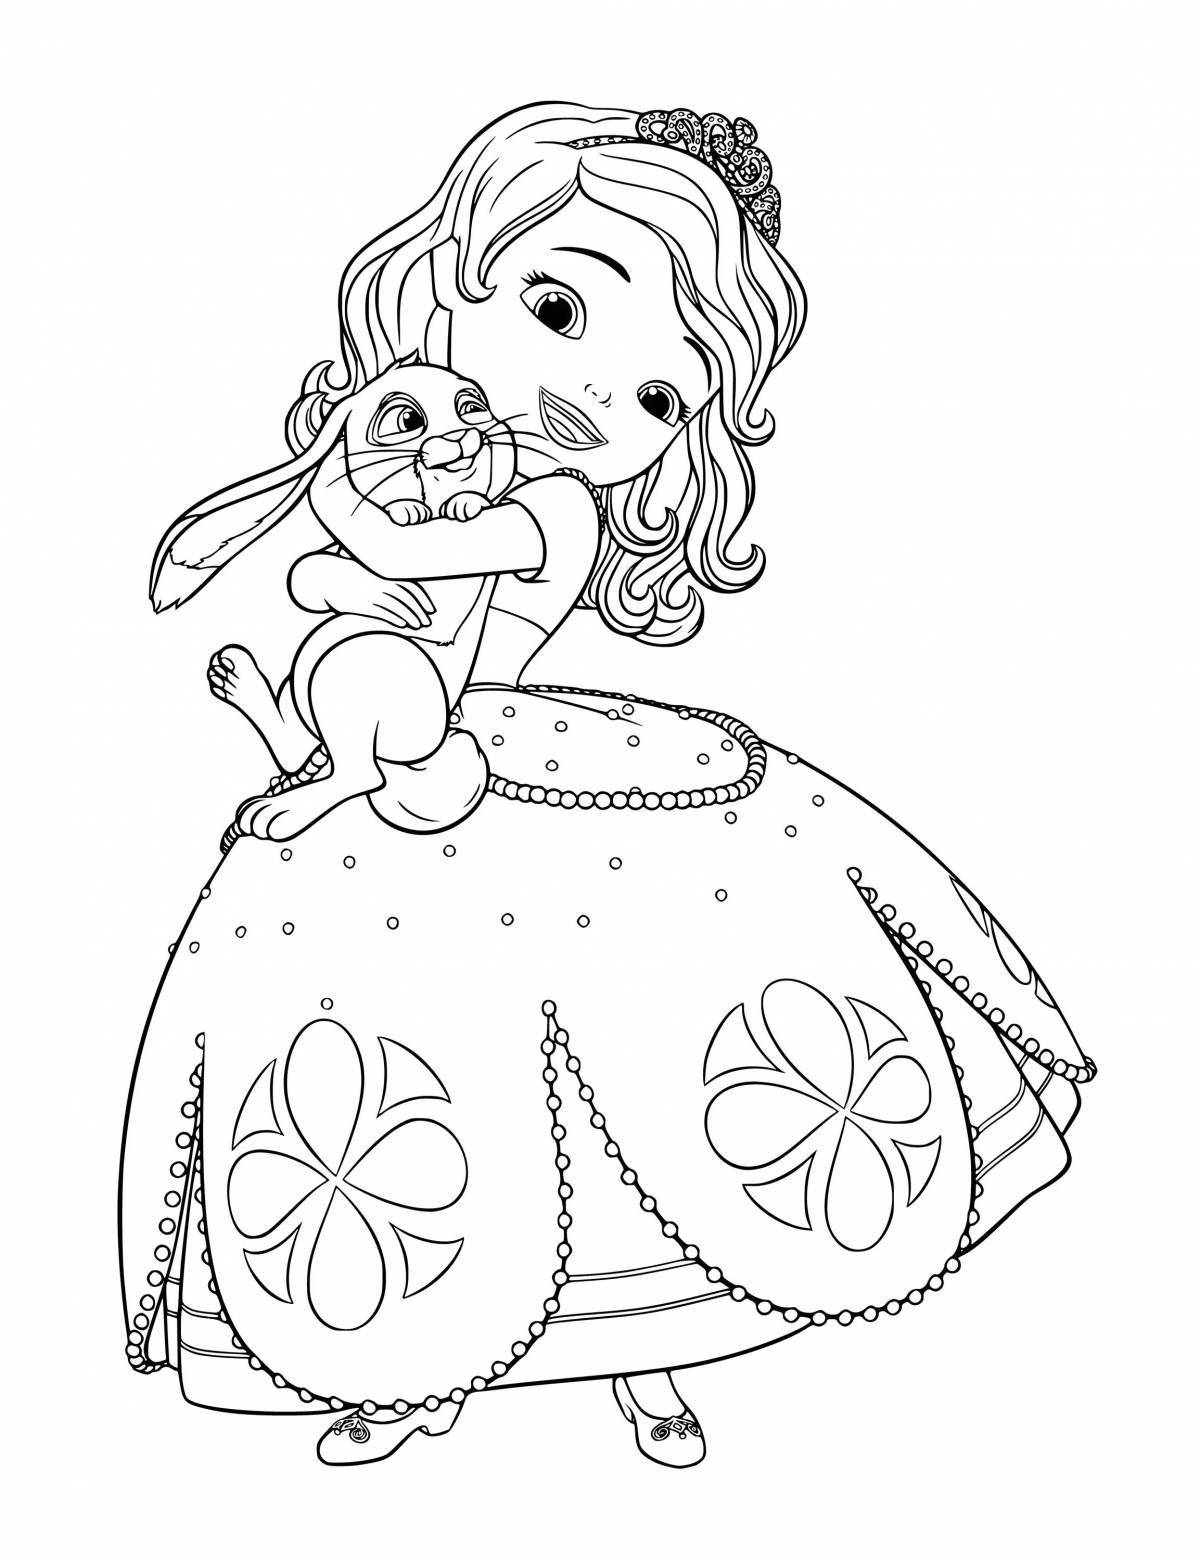 Coloring pages of princesses 4-5 years old